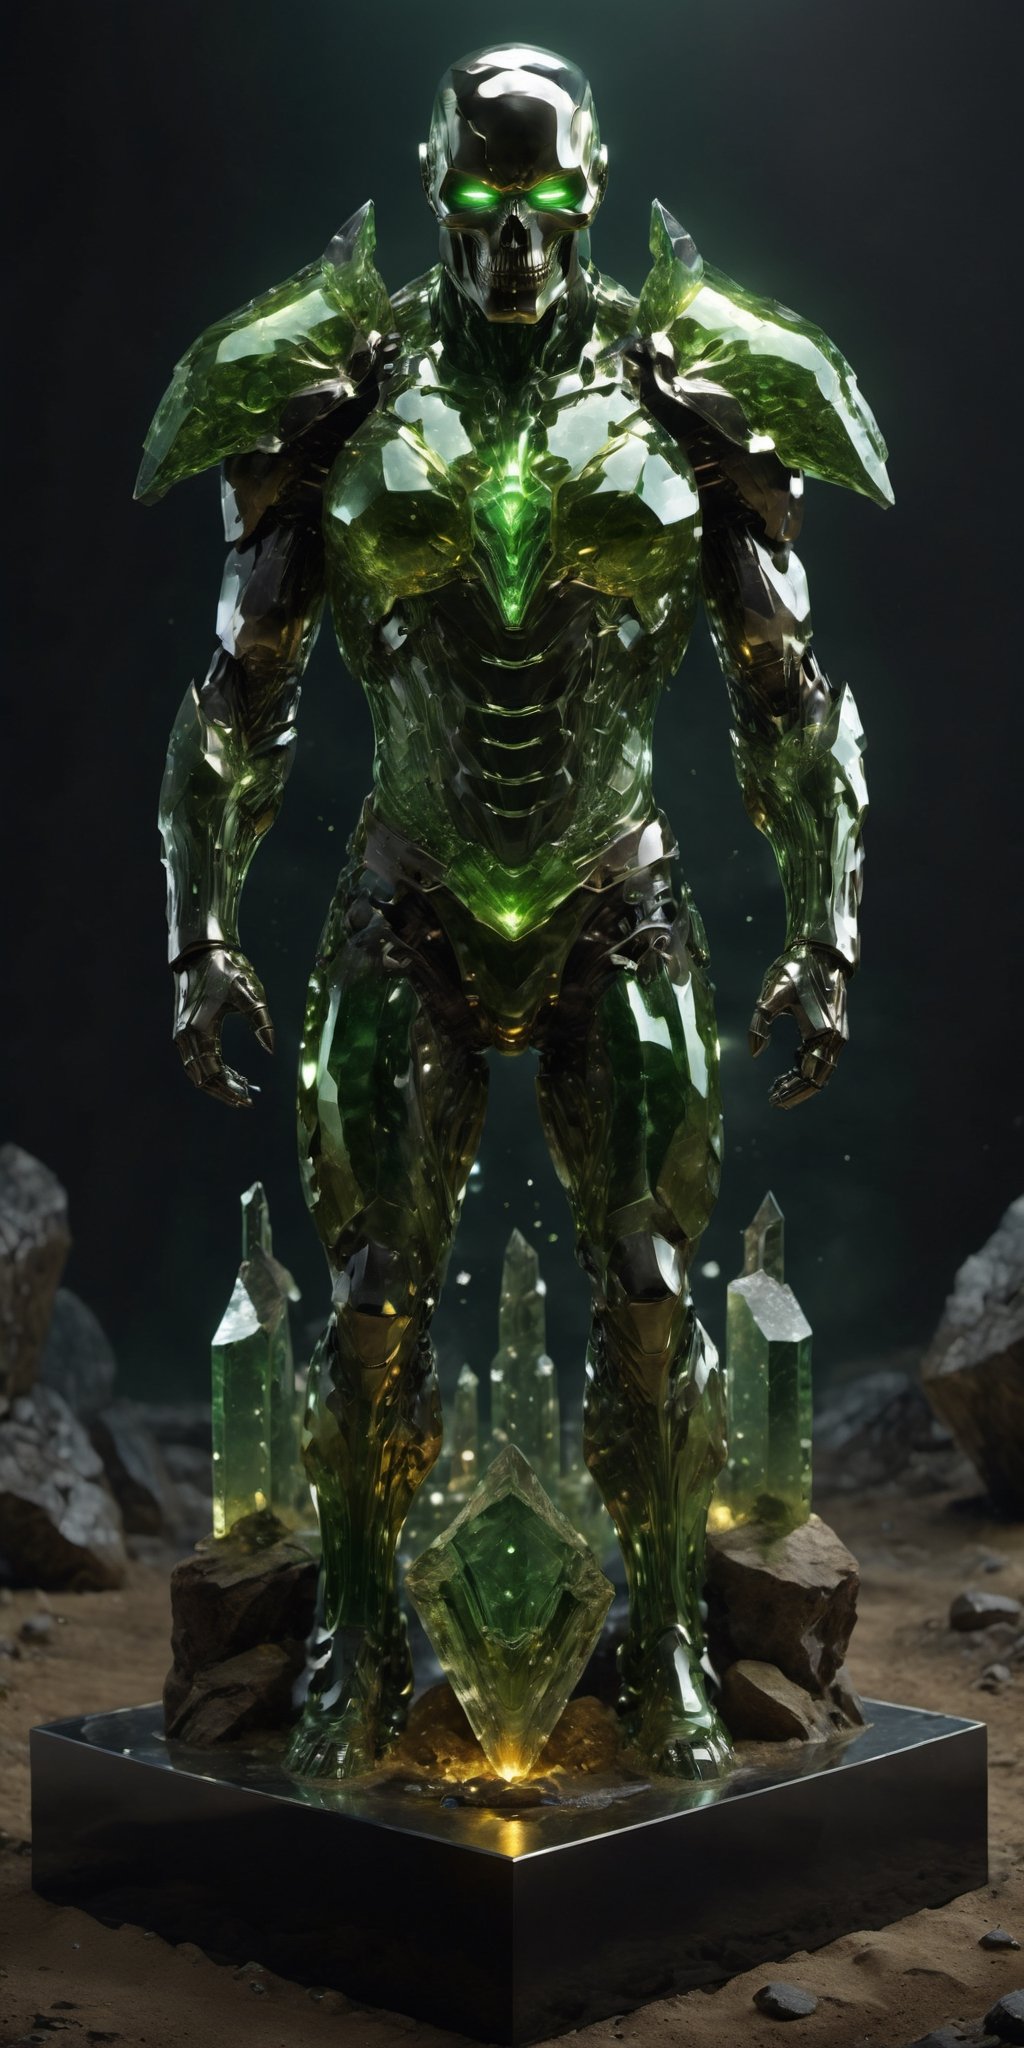 In a desolate wasteland, a towering Kryptonite Golem emerges. Its jagged crystalline form gleams with a toxic green hue, as fissures of deadly energy pulse within. Every refined facet and intricate detail shimmers in ultra-realistic precision, revealing the threat it poses. The highly-detailed, hyper-realistic masterpiece captures the essence of its menacing existence, ensuring an immersive 8K experience.